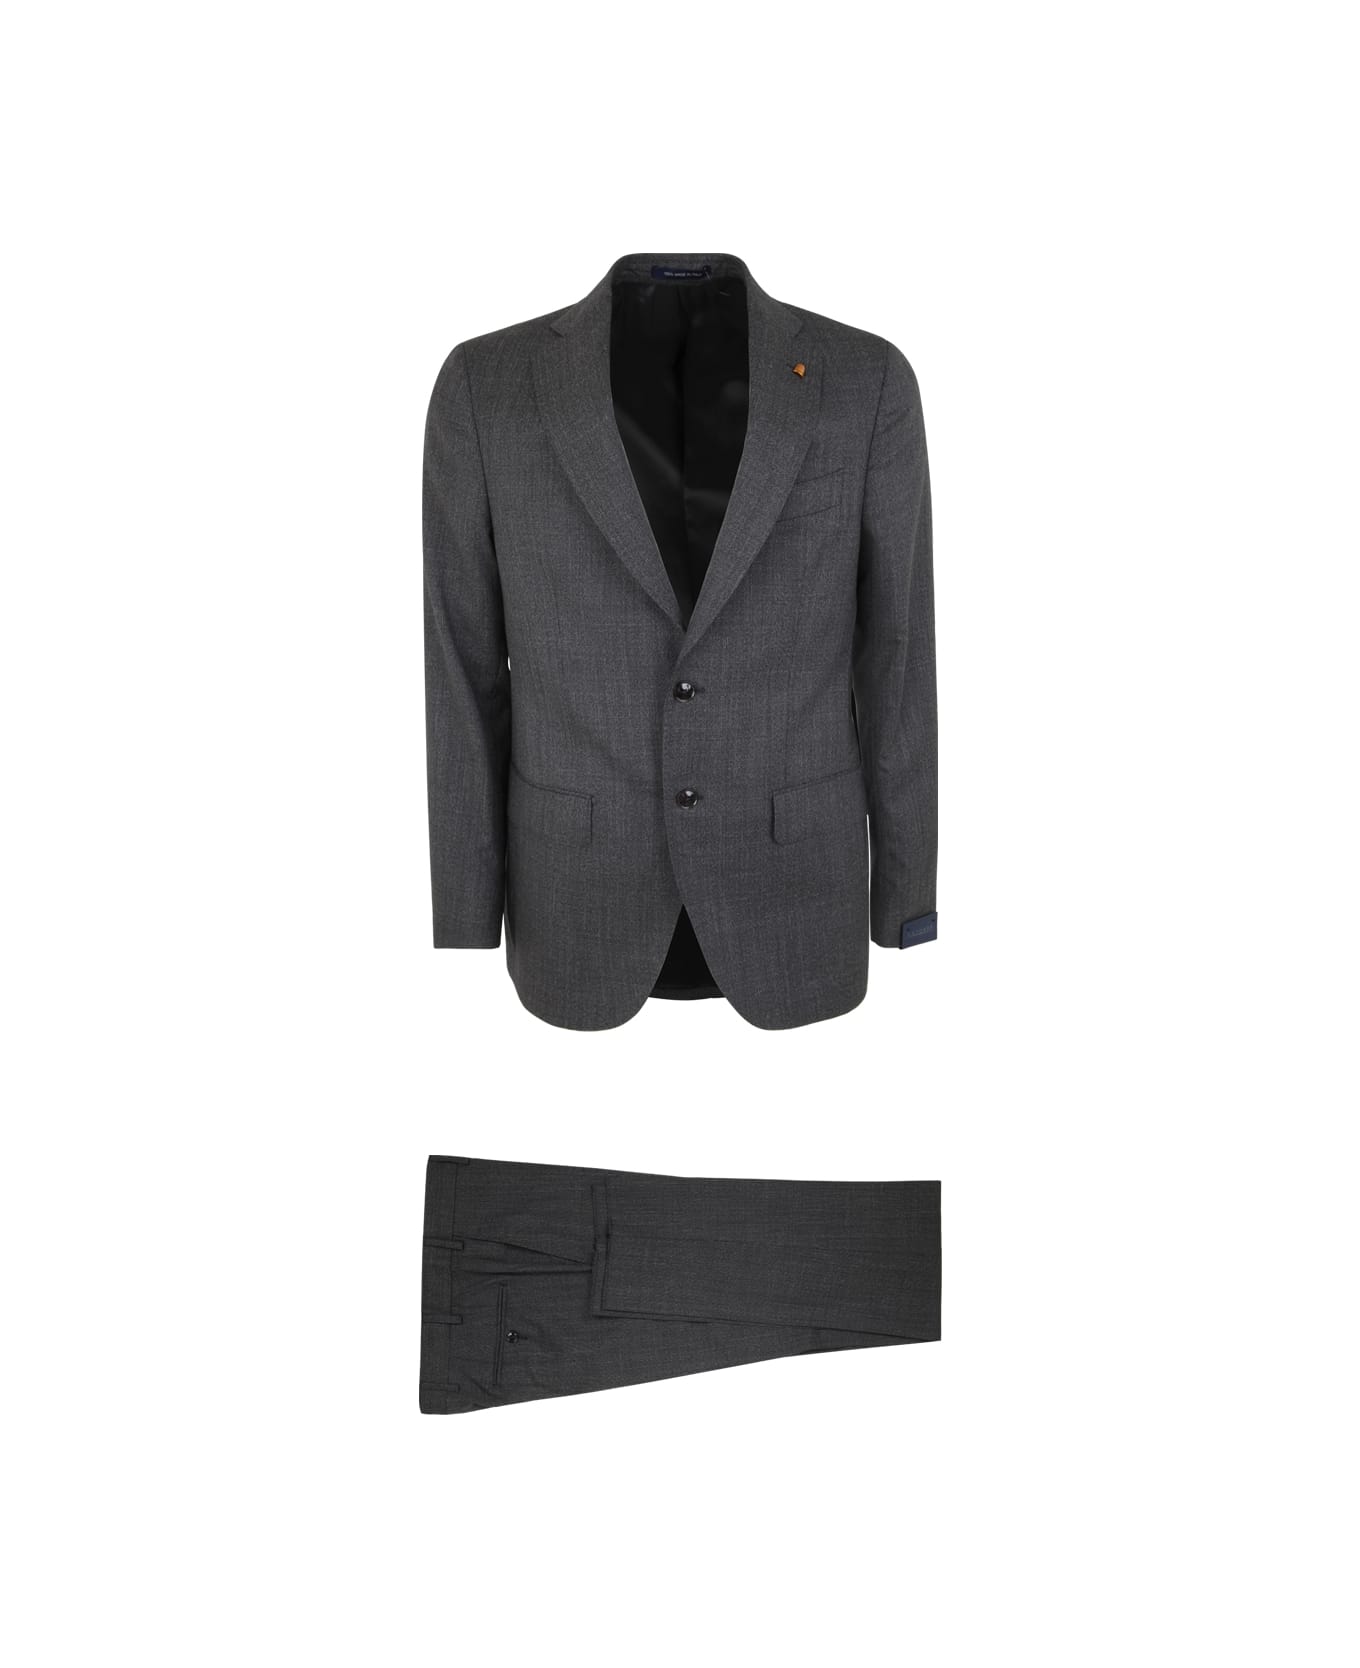 Sartoria Latorre Two Buttons Suit - Grey